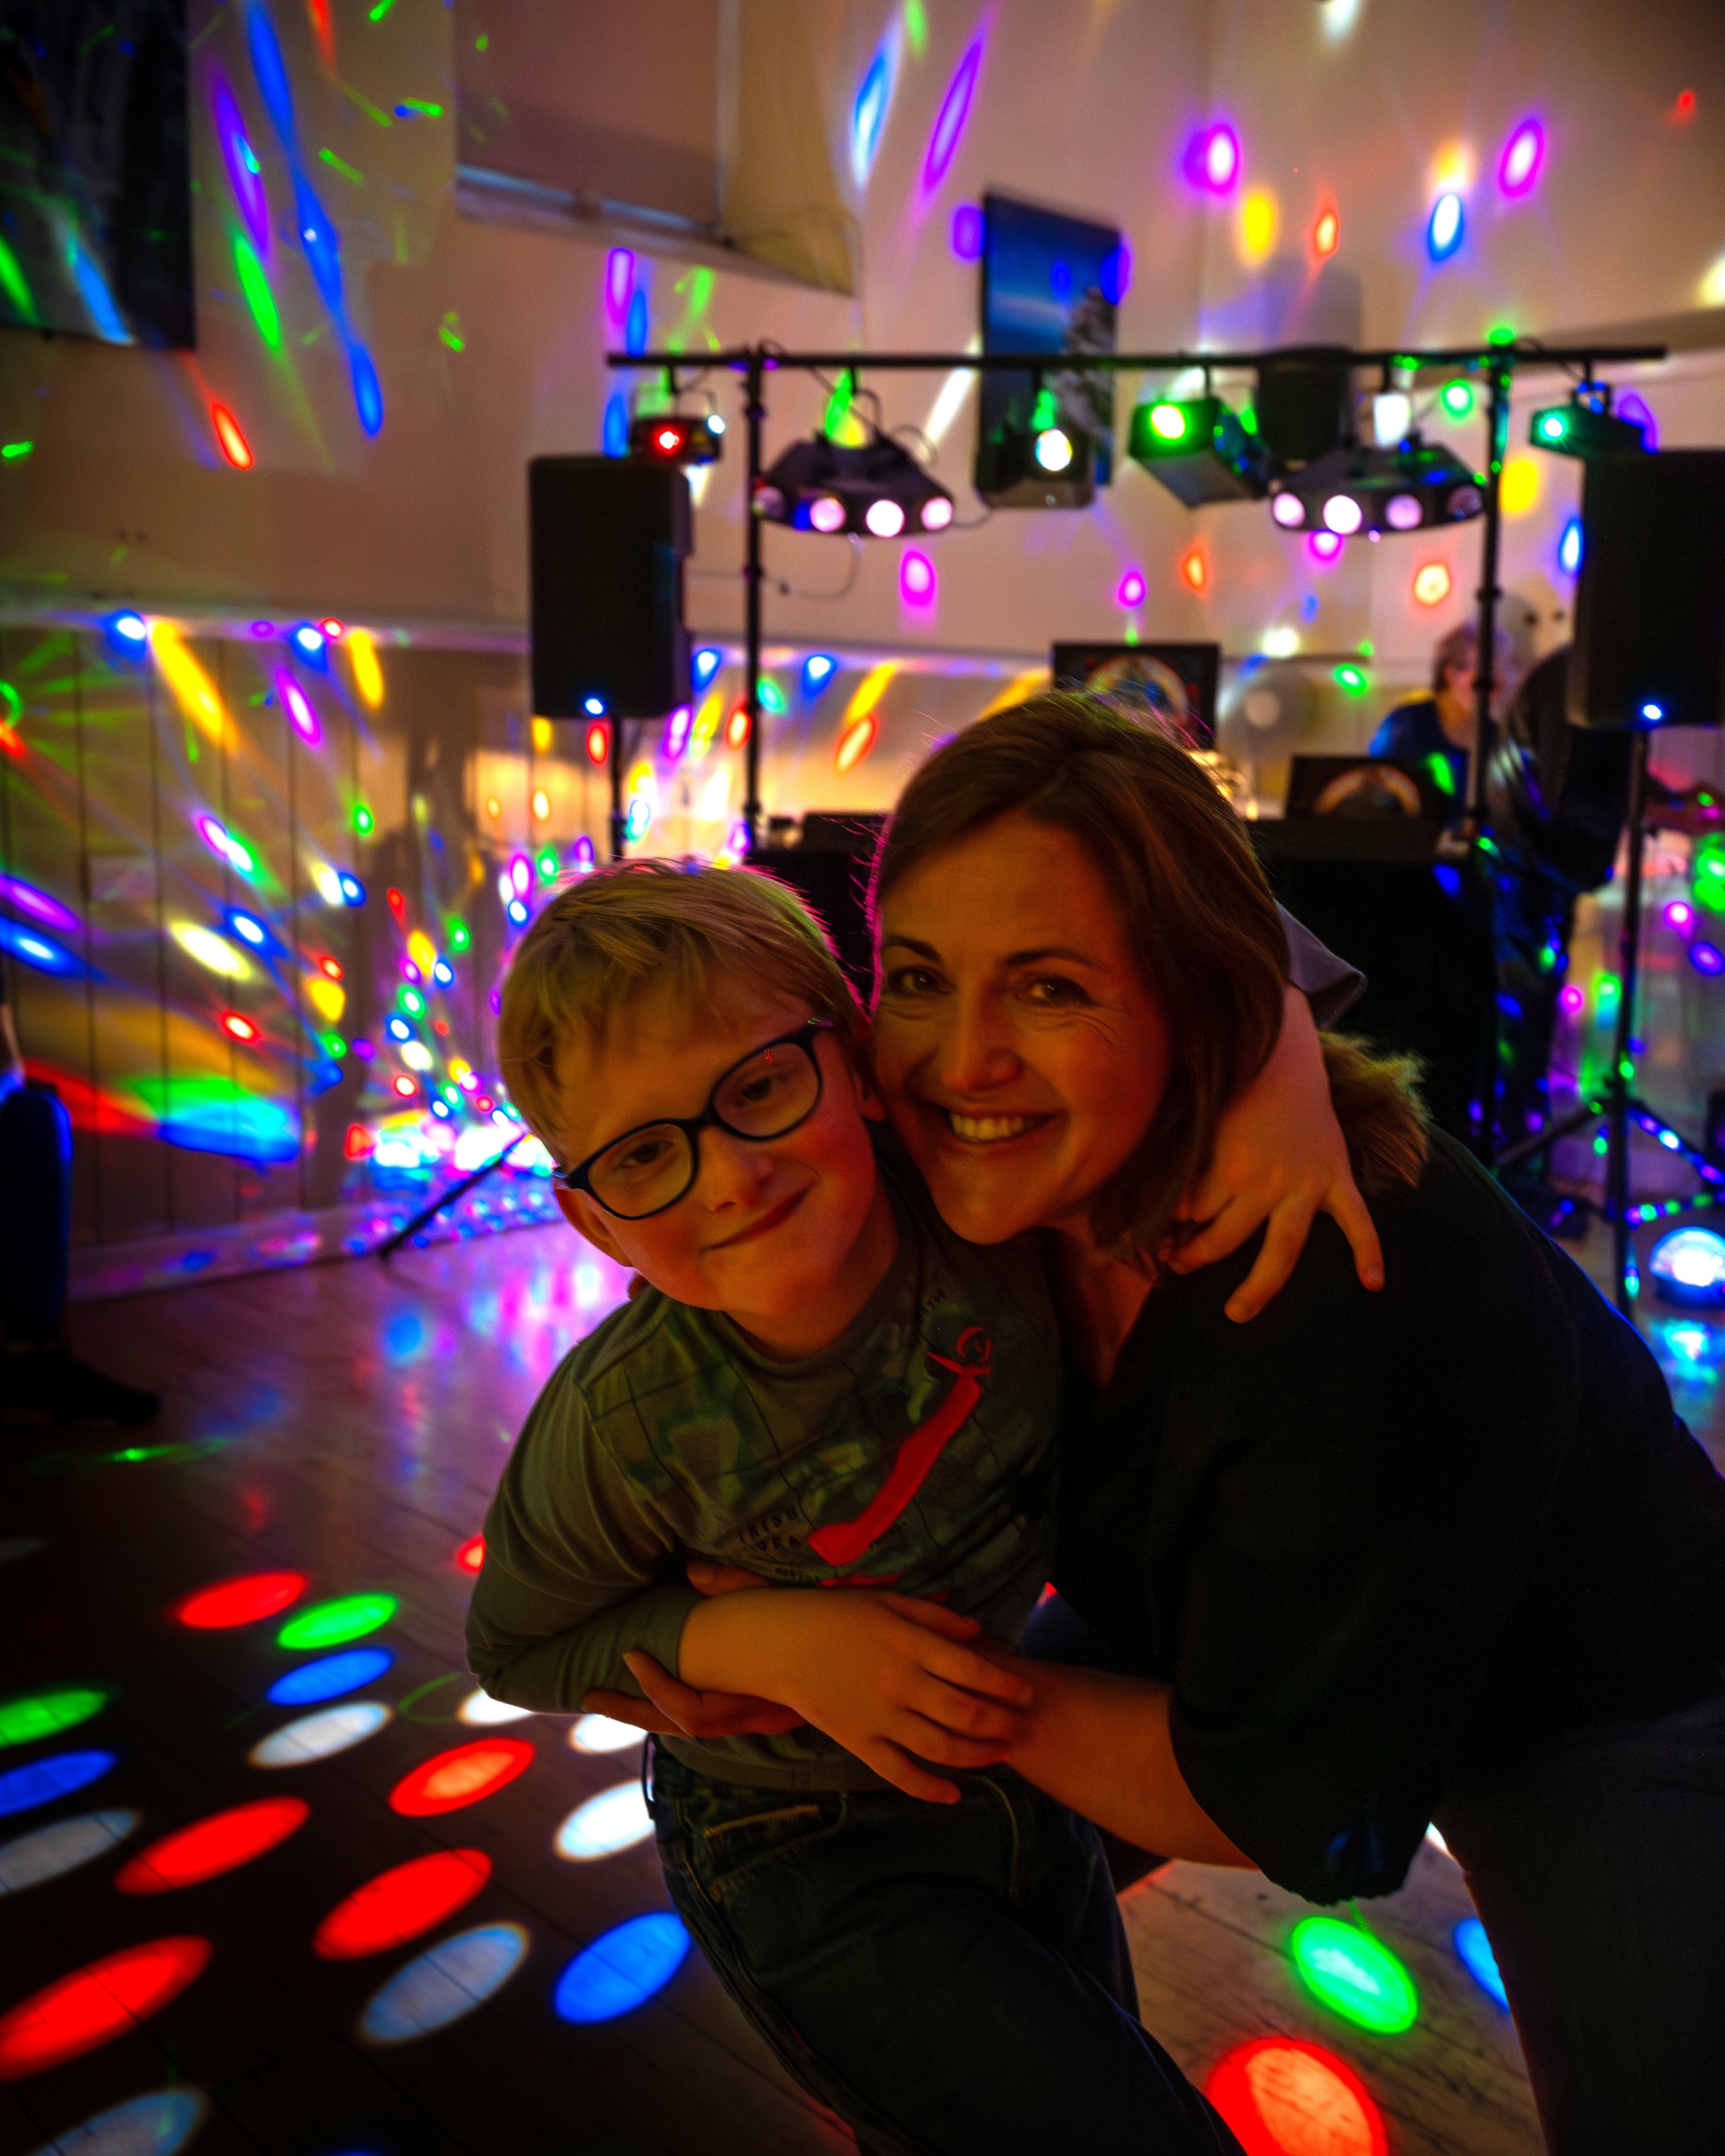 A DJ deck with speakers and lights in the background, with a woman and a young boy wearing glasses smiling at the camera in the foreground.